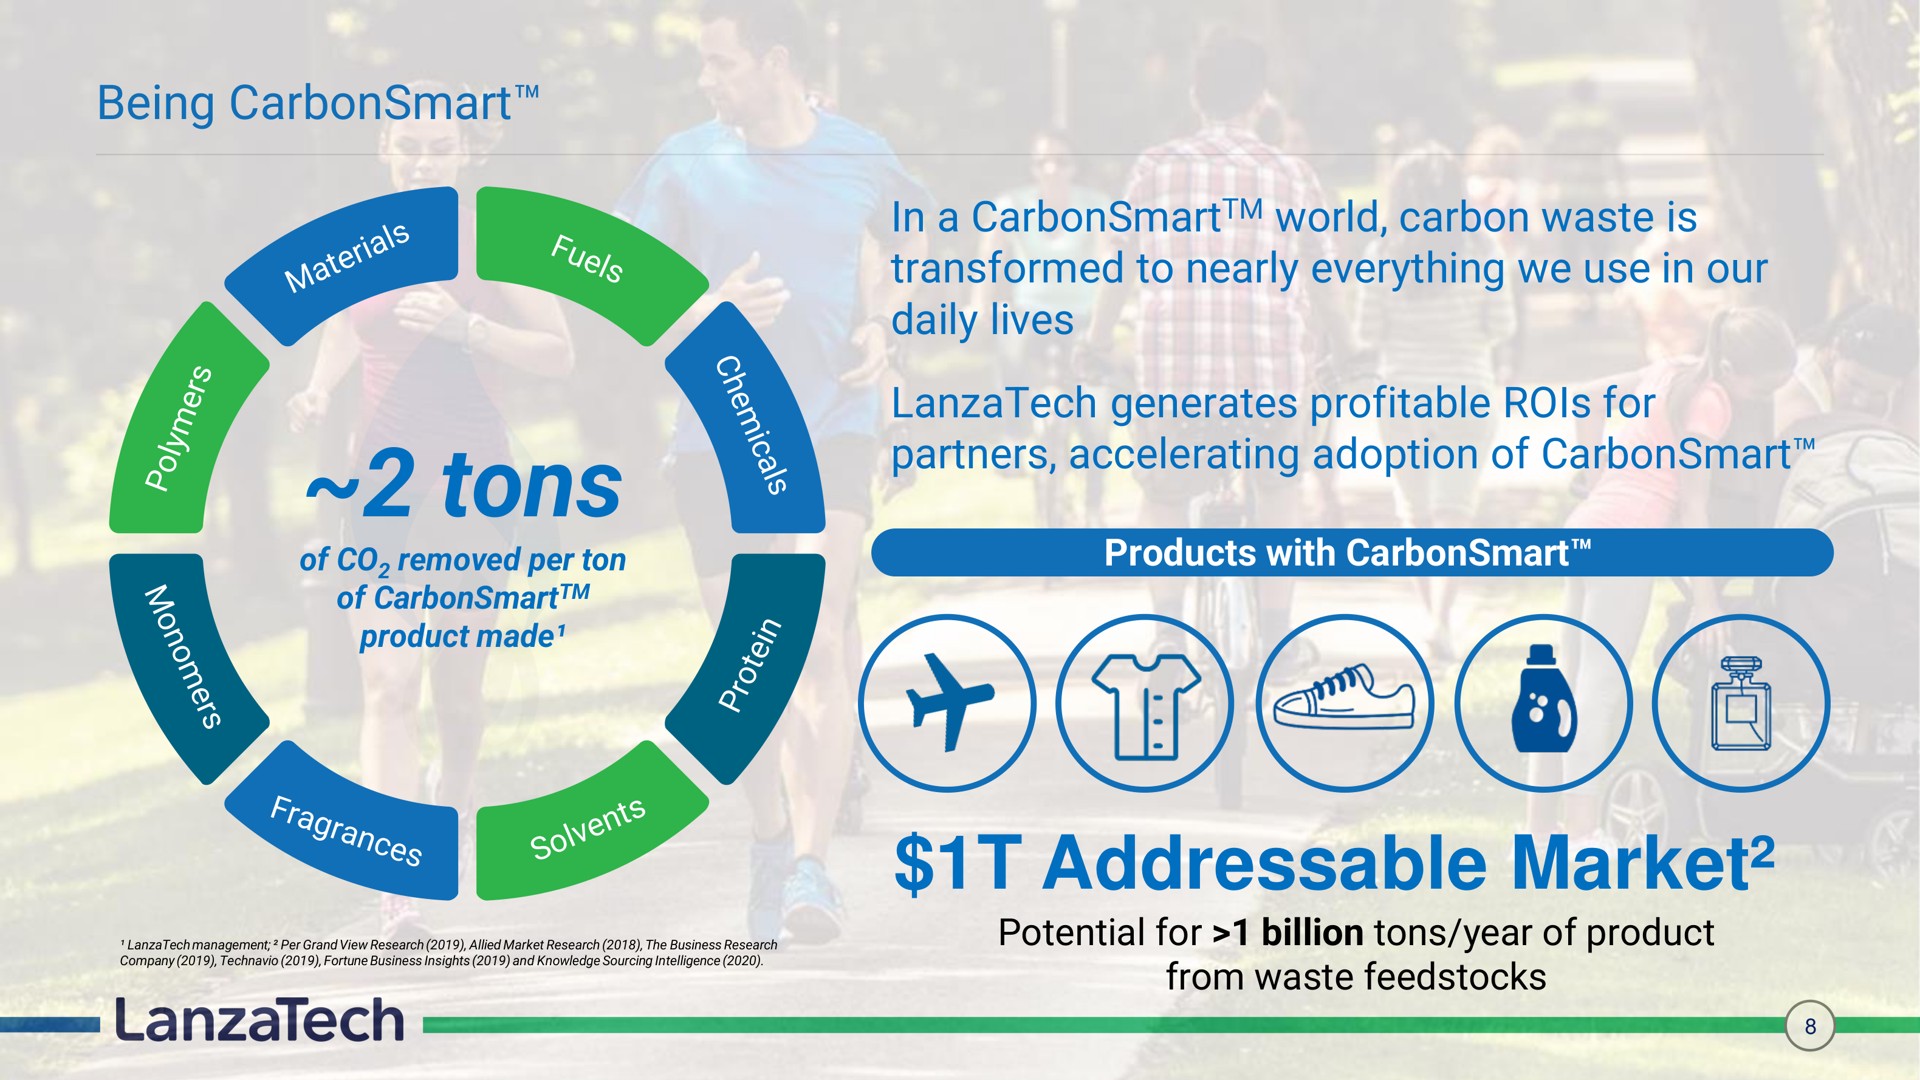 being tons in a world carbon waste is transformed to nearly everything we use in our daily lives generates profitable rois for partners accelerating adoption of market as dart eer he potential billion year product | LanzaTech